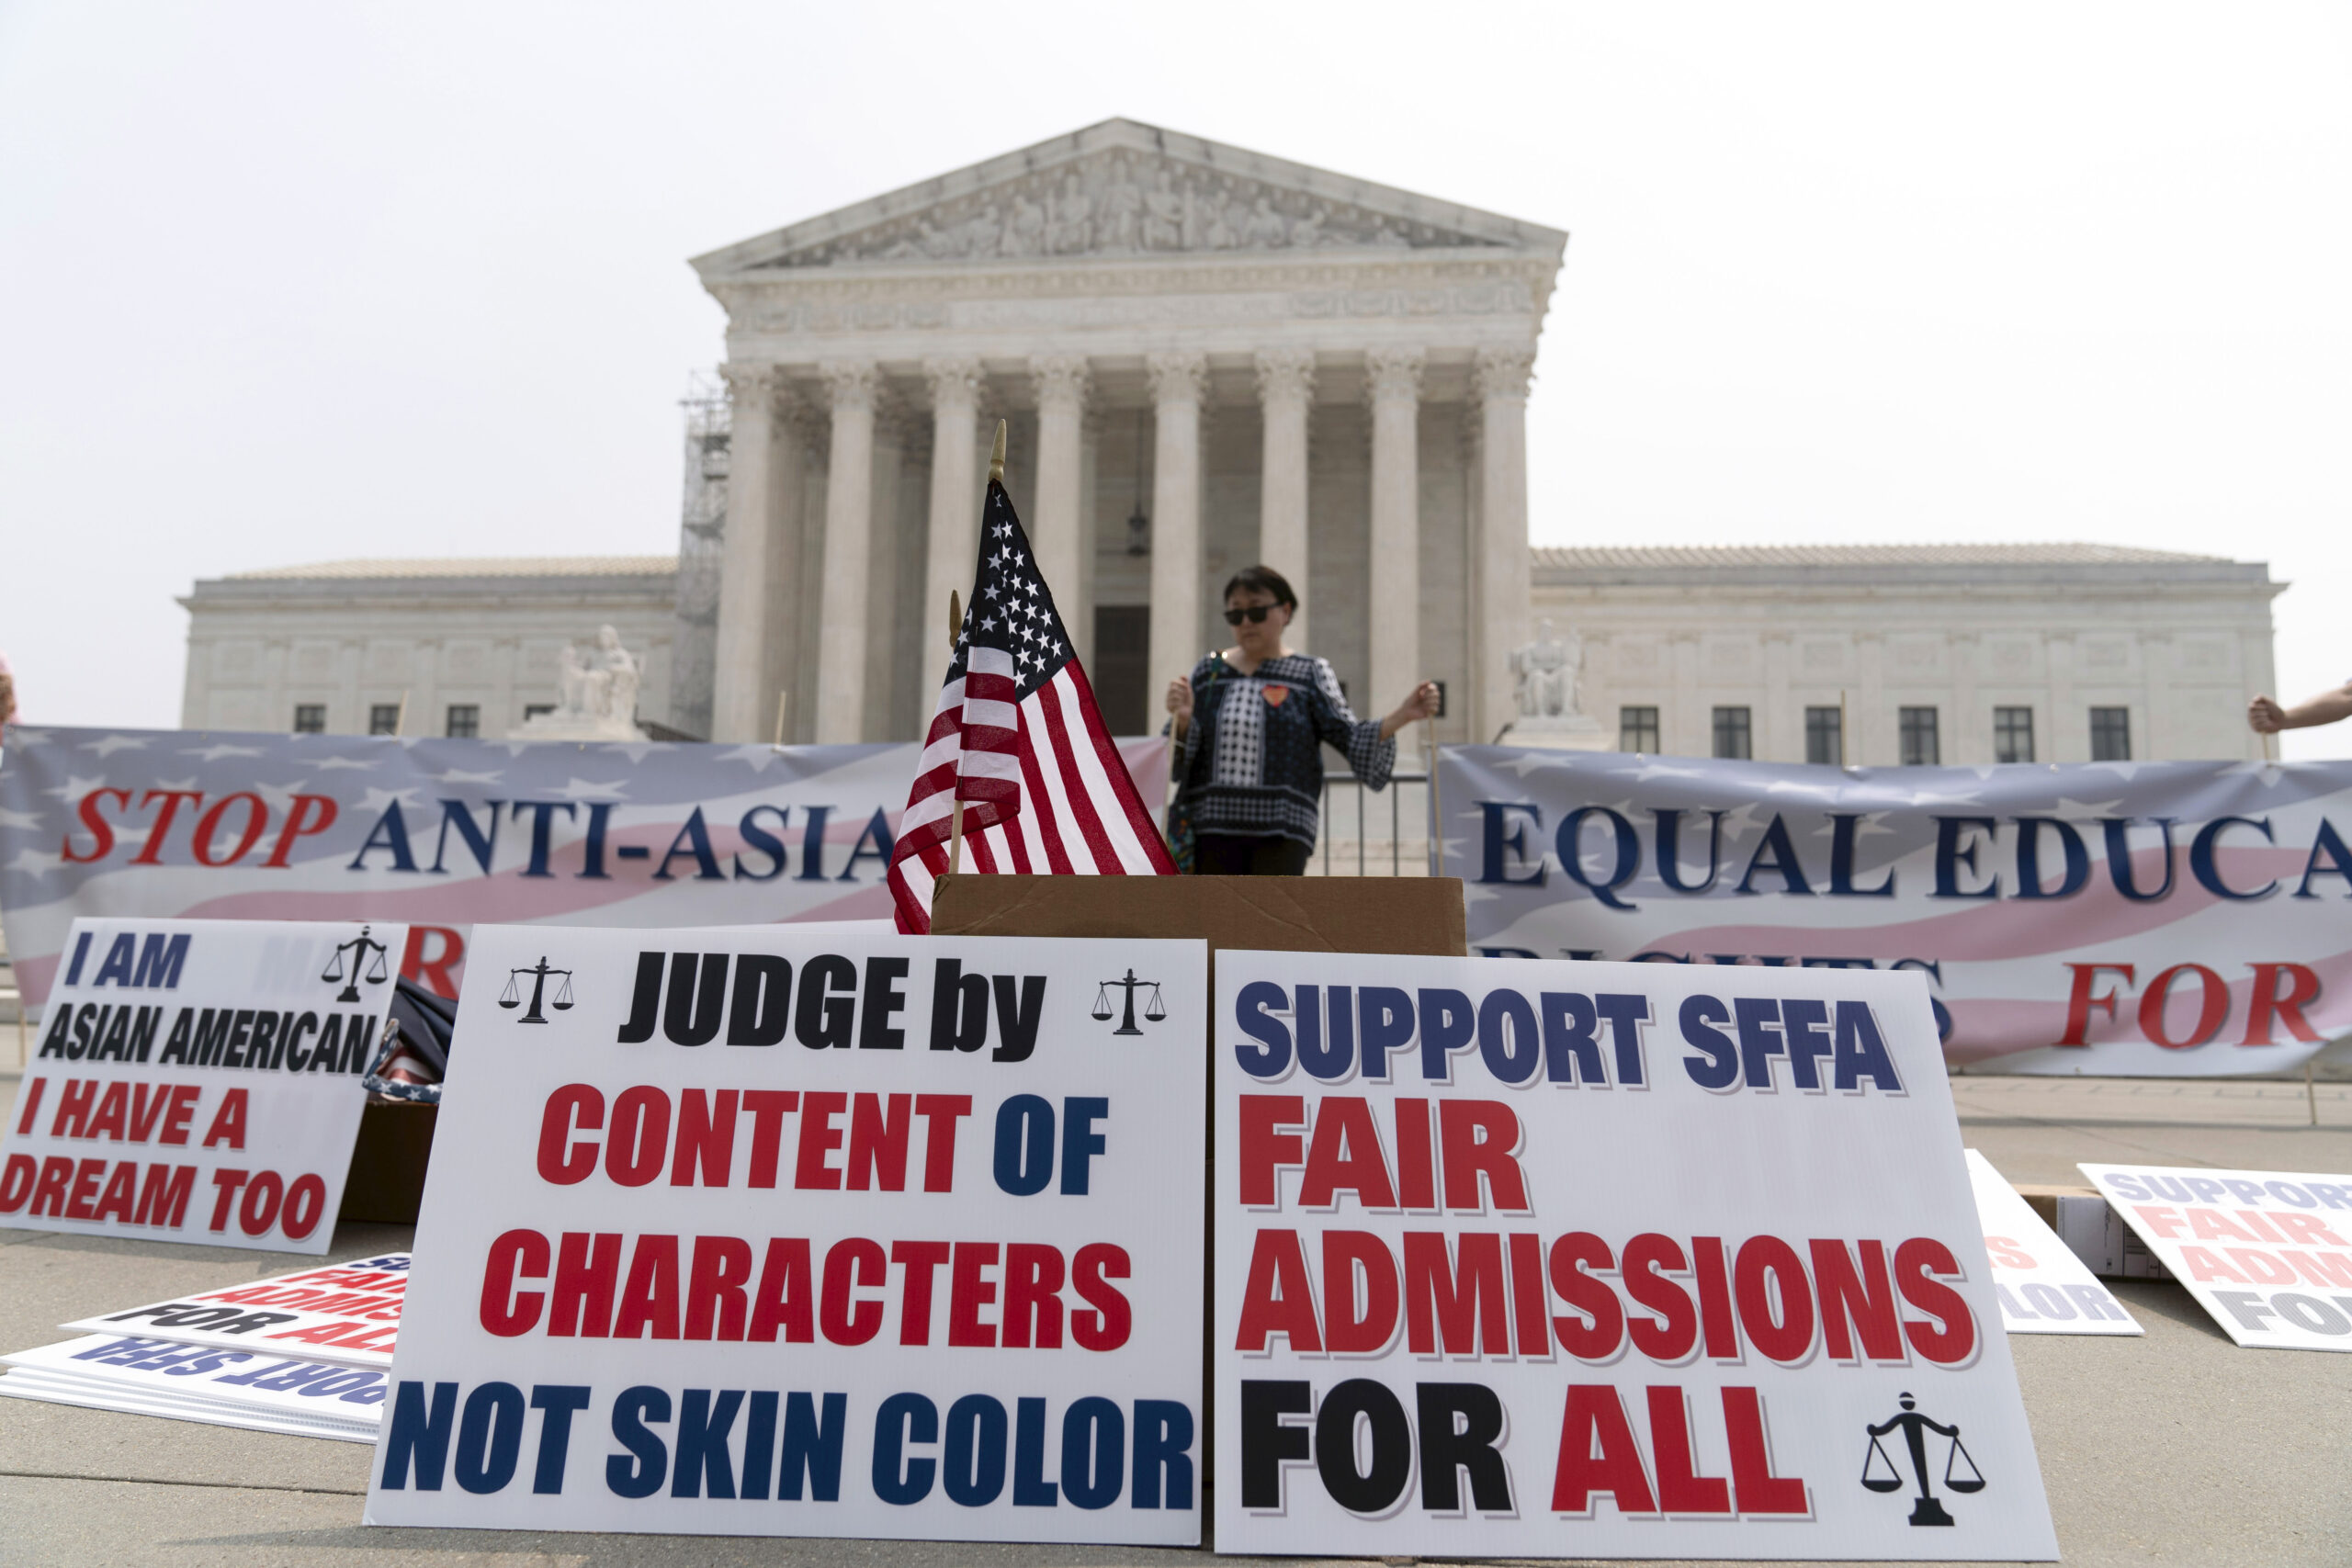 On a day where major Supreme Court verdicts are expected to roll in, affirmative action programs at the University of North Carolina and Harvard were struck down.